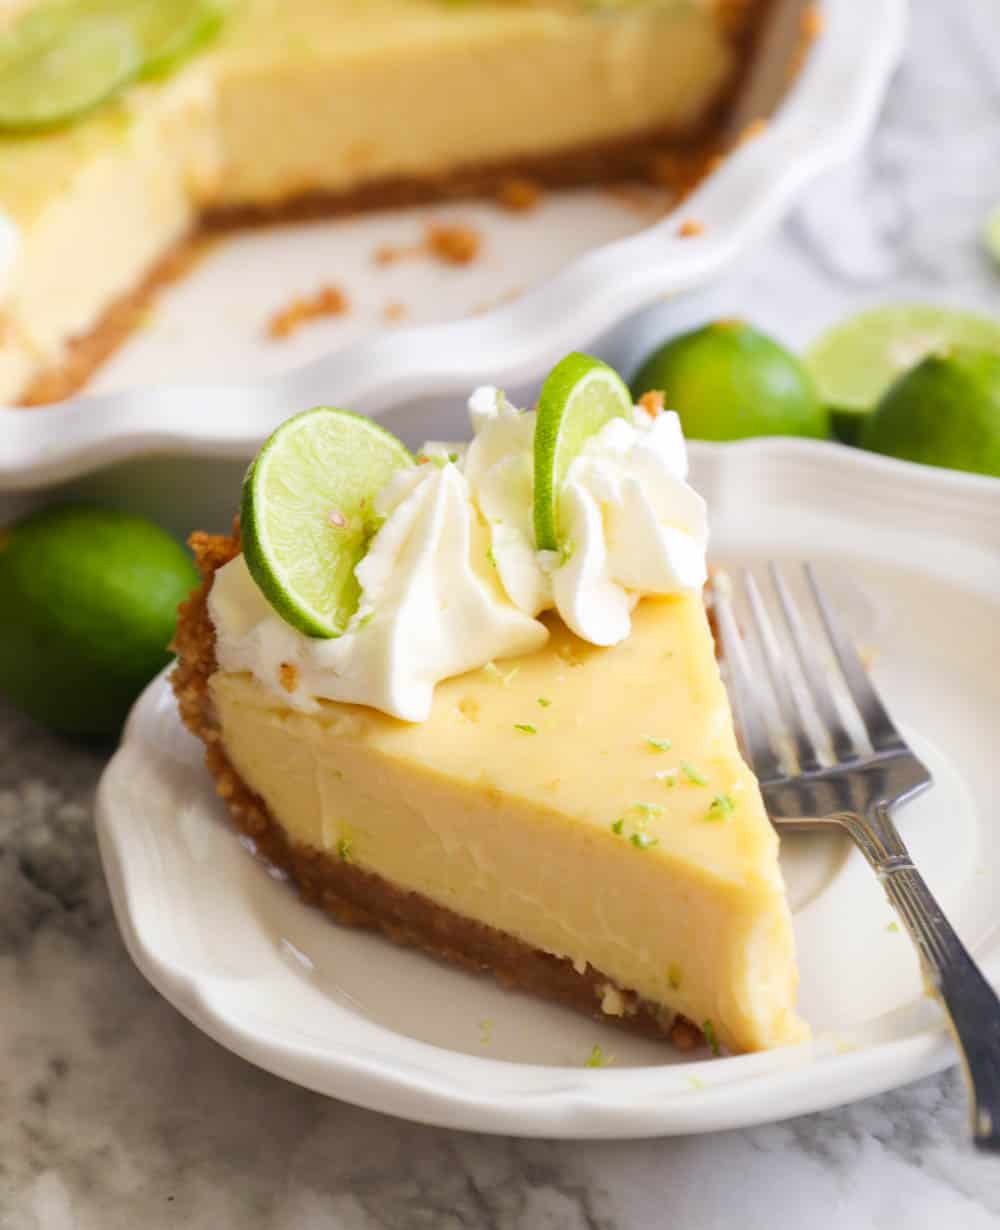 A slice of key lime pie on a white plate